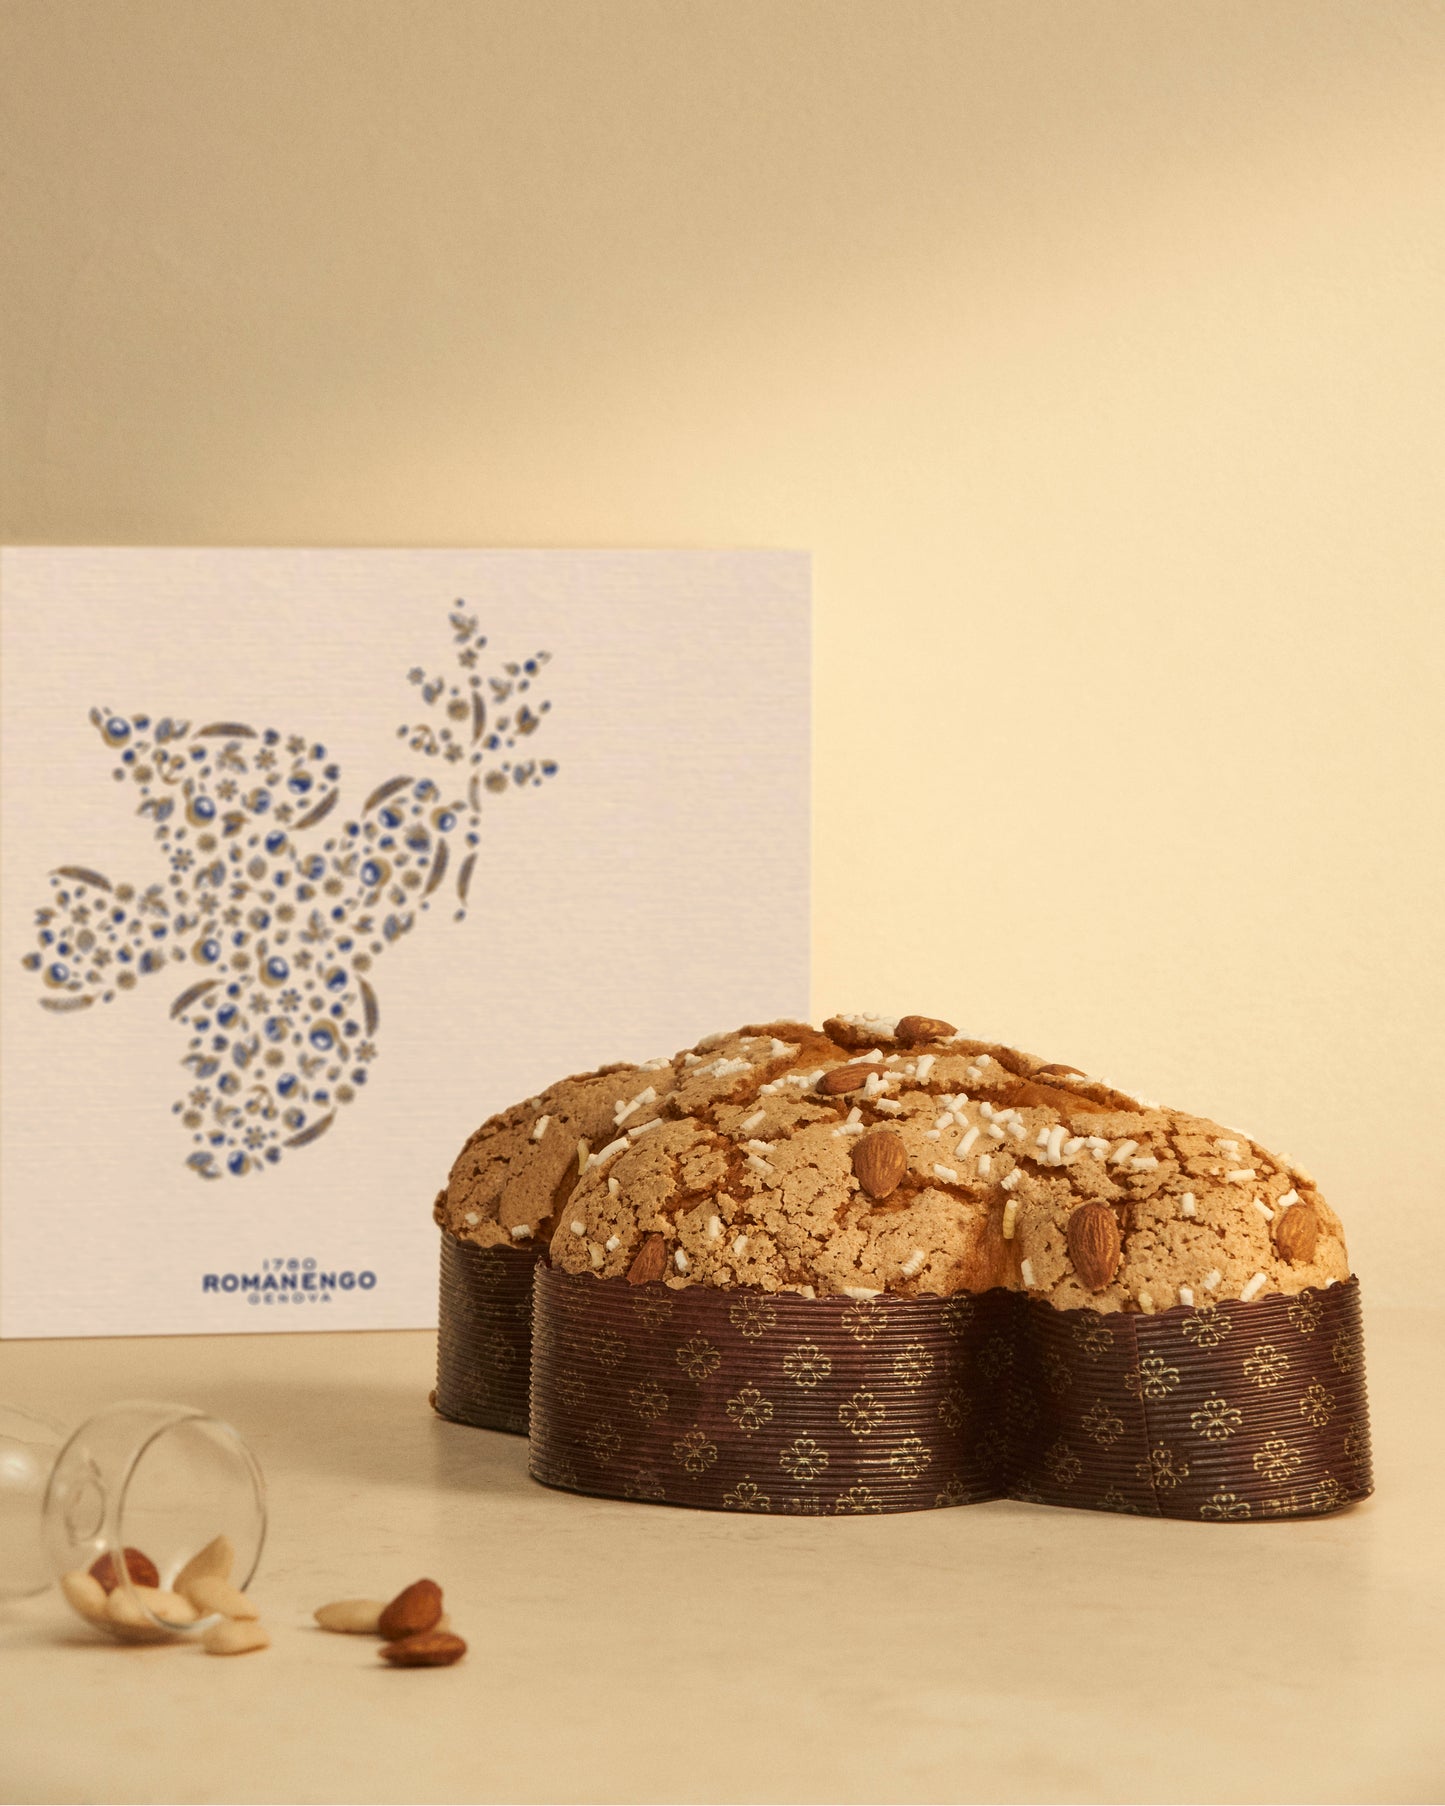 Artisan Colomba with Romanengo Candied Clementine and Wooden Box